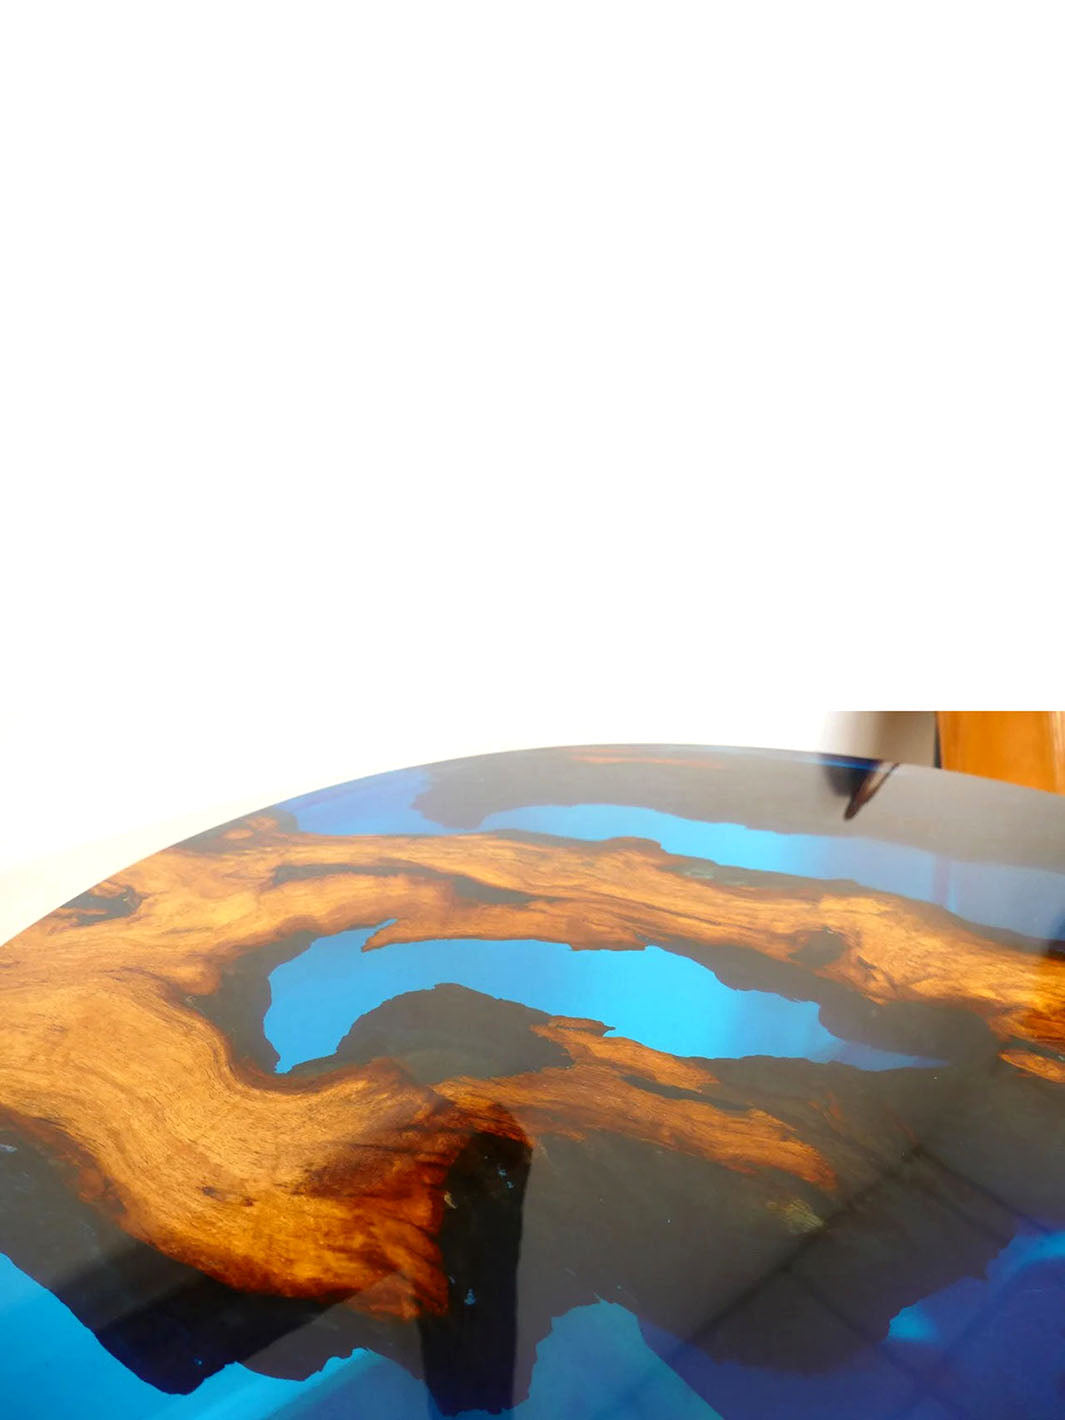 Luxurious Circular Handcrafted River Beach Epoxy Resin Wooden Dining Table | 80cm Made 4 Decor Tables MDR0017-2